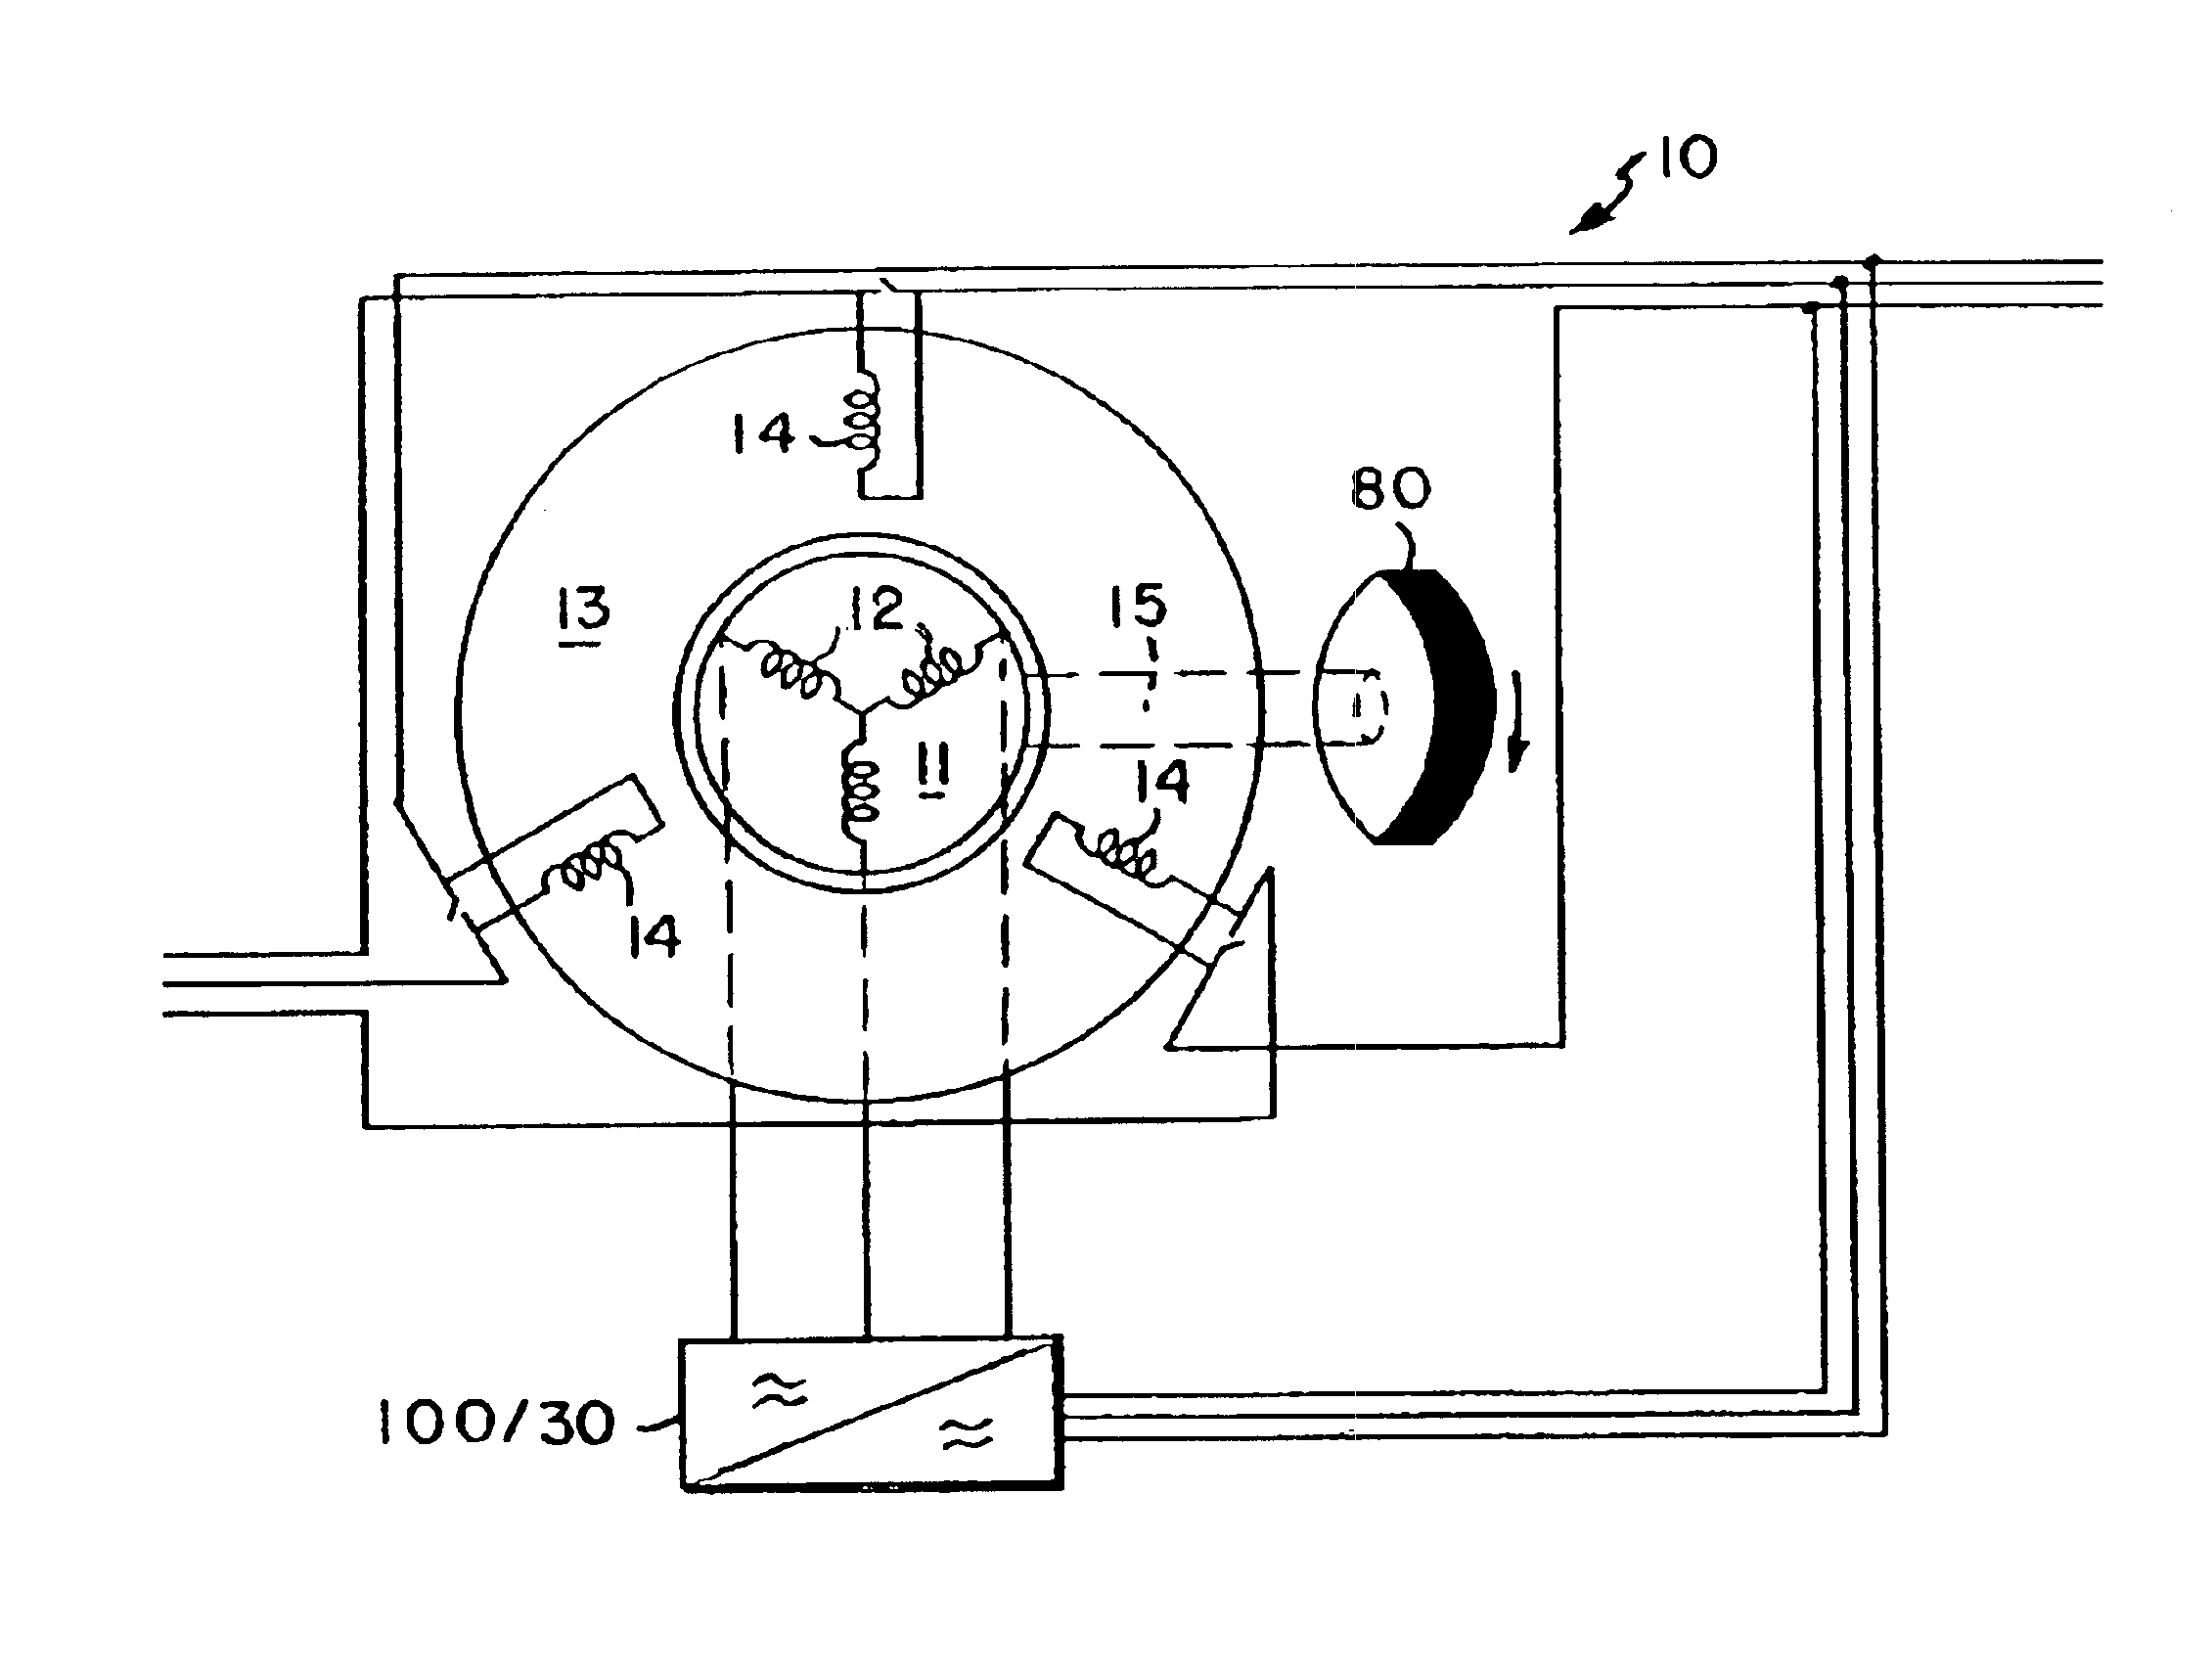 Uninterruptible power supply system using a slip-ring, wound-rotor-type induction machine and a method for flywheel energy storage